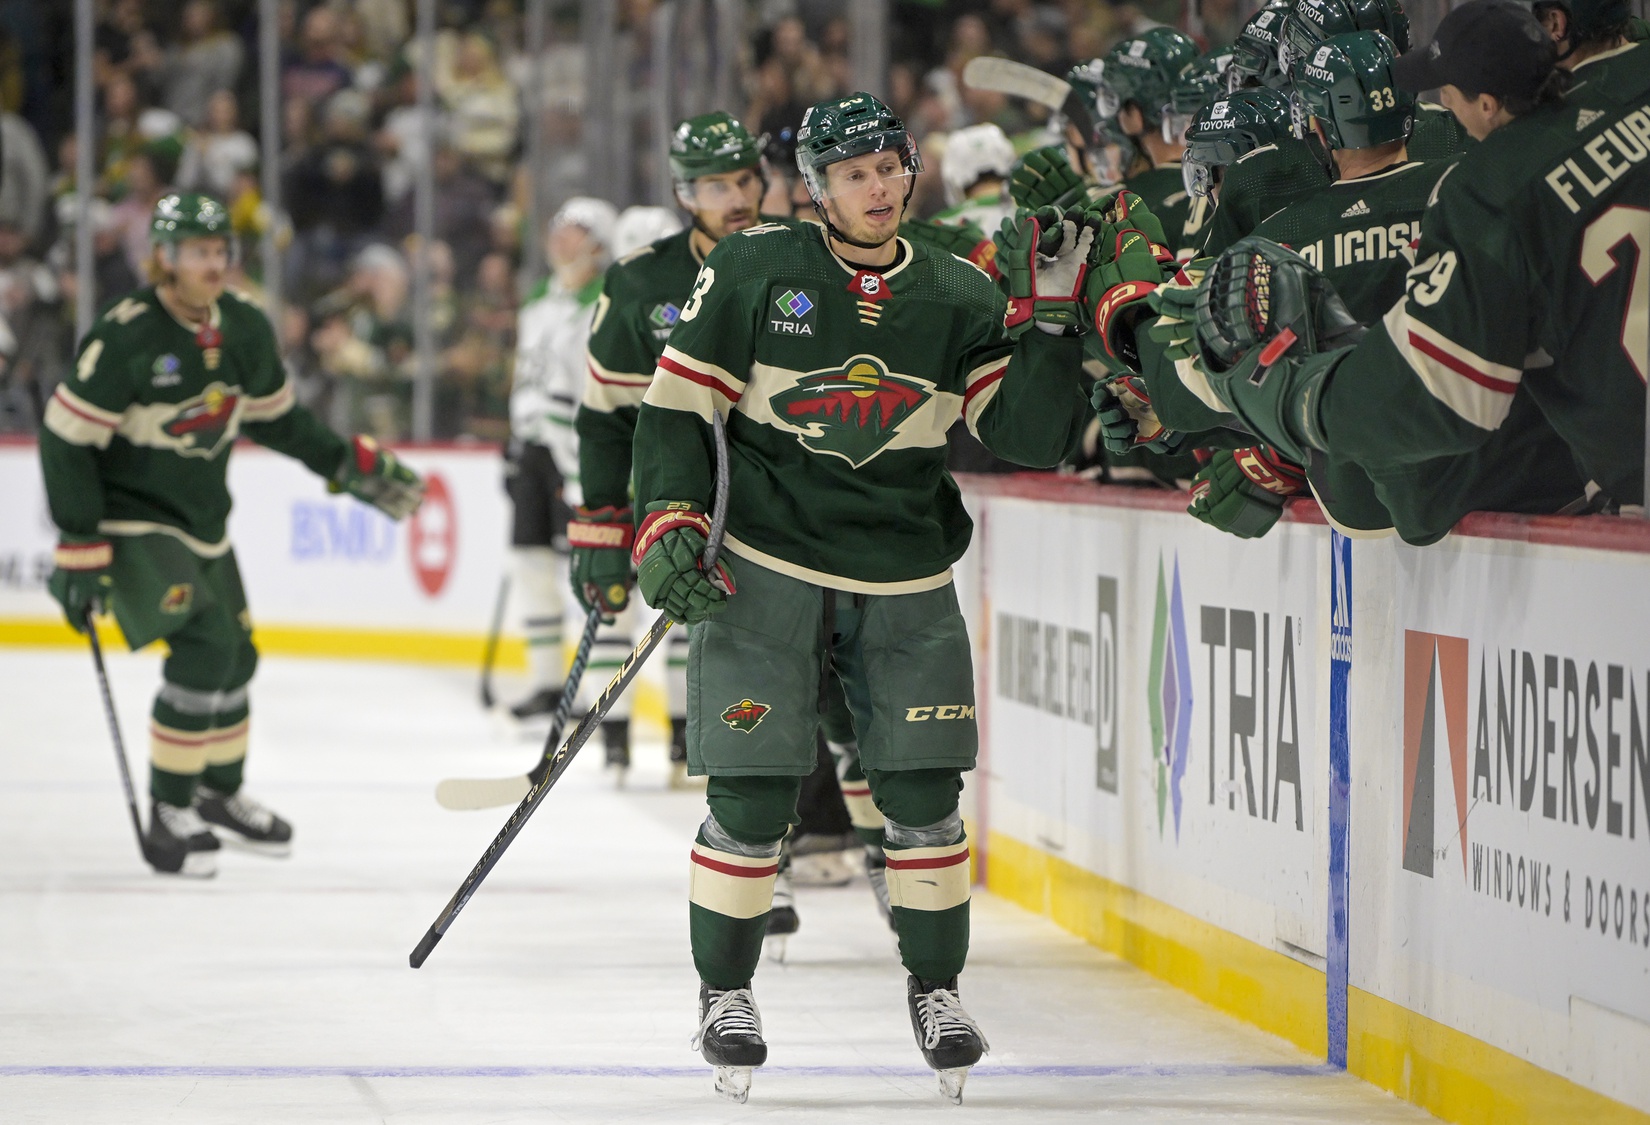 Minnesota Wild by DT Concepts — Updated 2/14 - Concepts - Chris